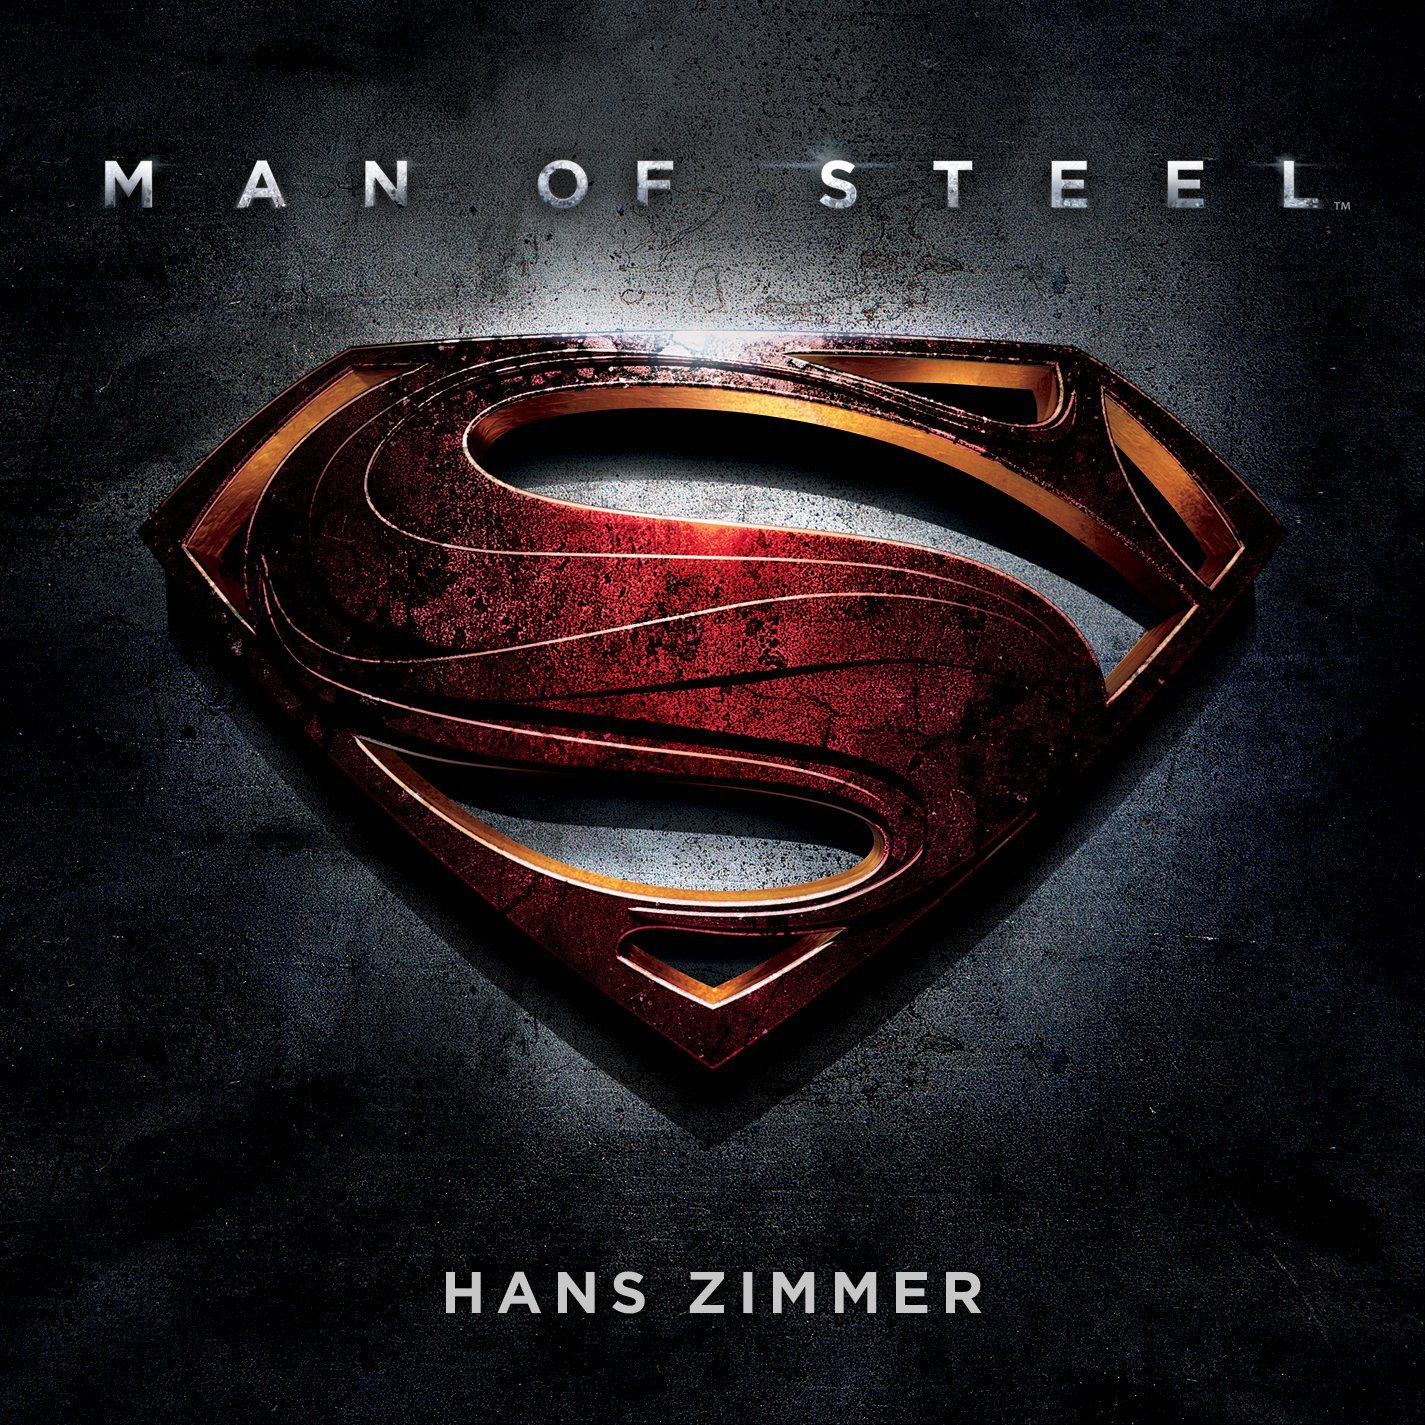 News Added May 08, 2013 Academy Award, Grammy, and Golden Globe-winning composer Hans Zimmer composed the music for this highly anticipated project, joining forces for the first time with director Zack Snyder. The challenges of creating a Superman score are daunting because Superman is so iconographic, said Snyder. I really feel like what Hans created […]